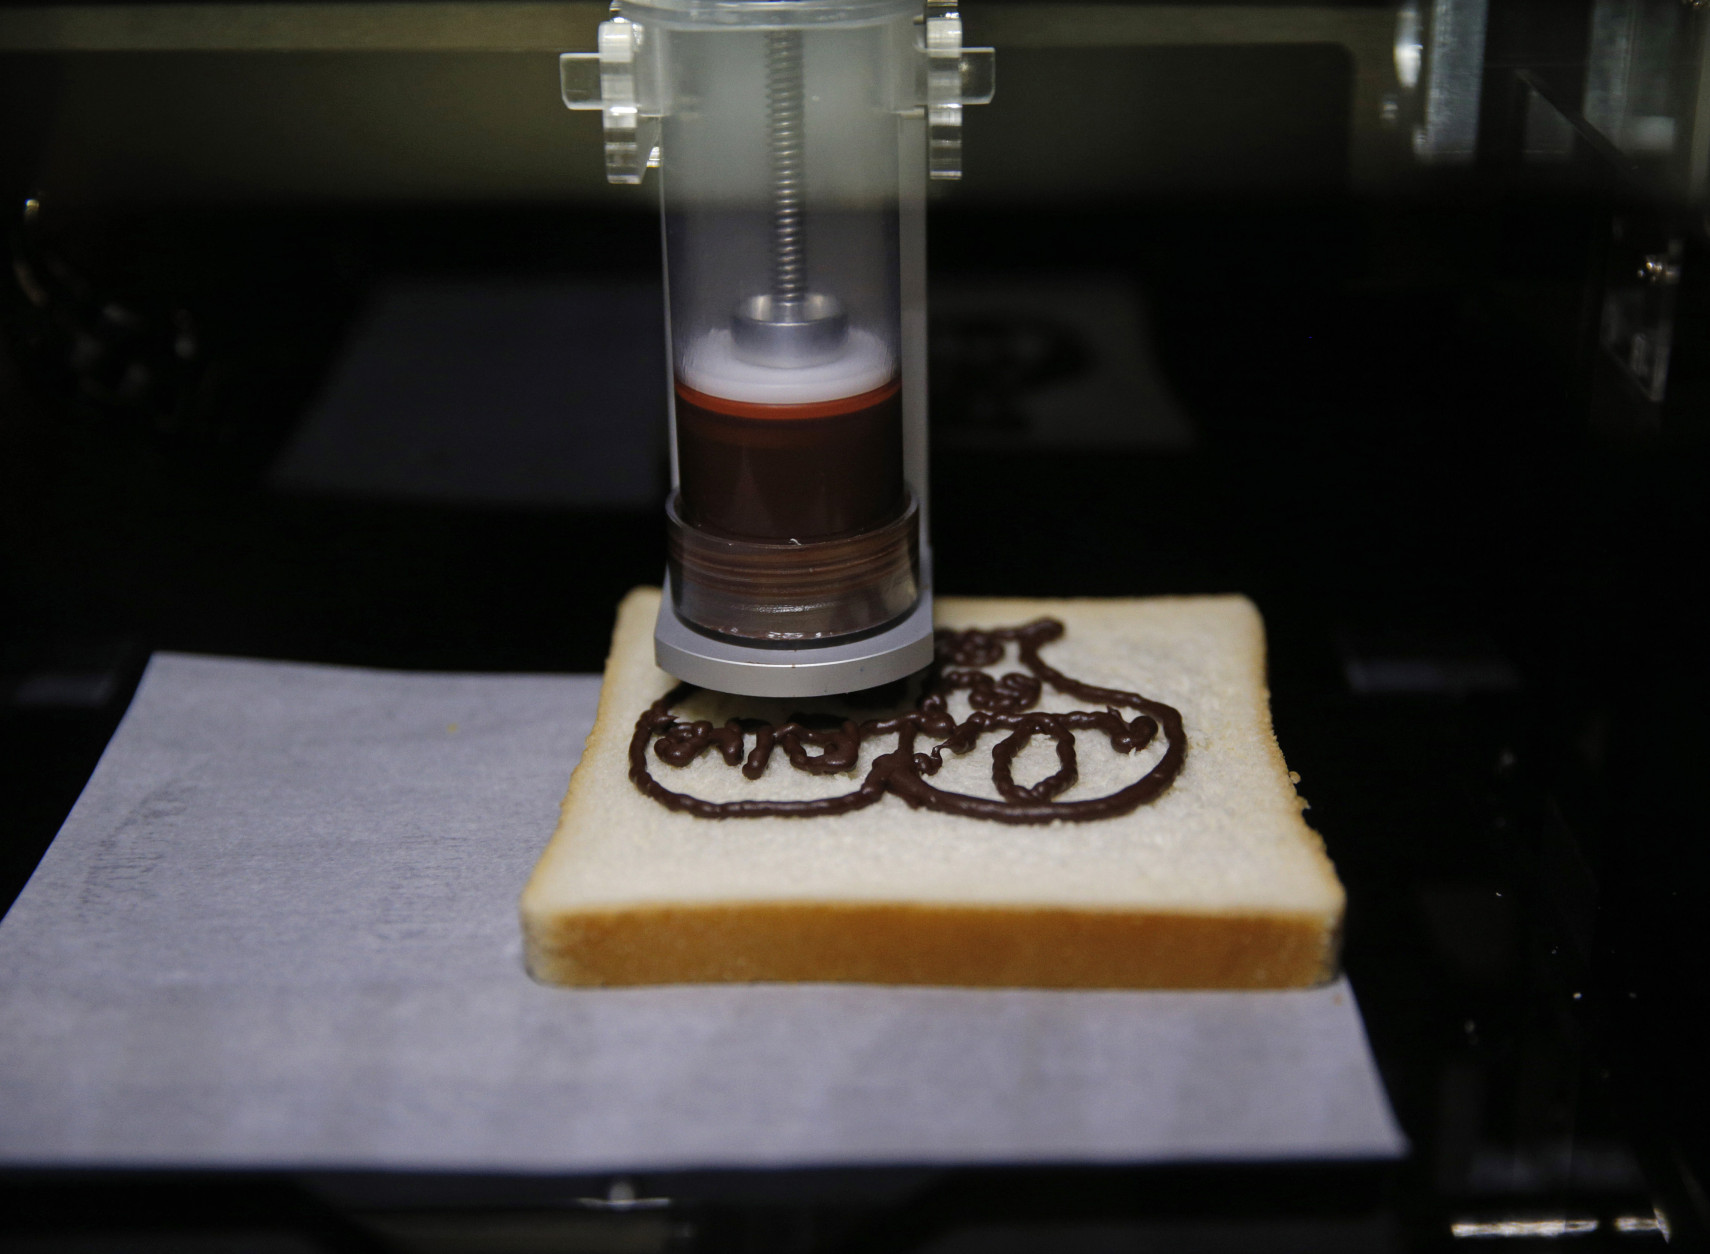 The XYZprinting 3D Food Printer displays a design in chocolate on a piece of bread at CES Unveiled, a media preview event for CES International, Sunday, Jan. 4, 2015, in Las Vegas. (AP Photo/John Locher)